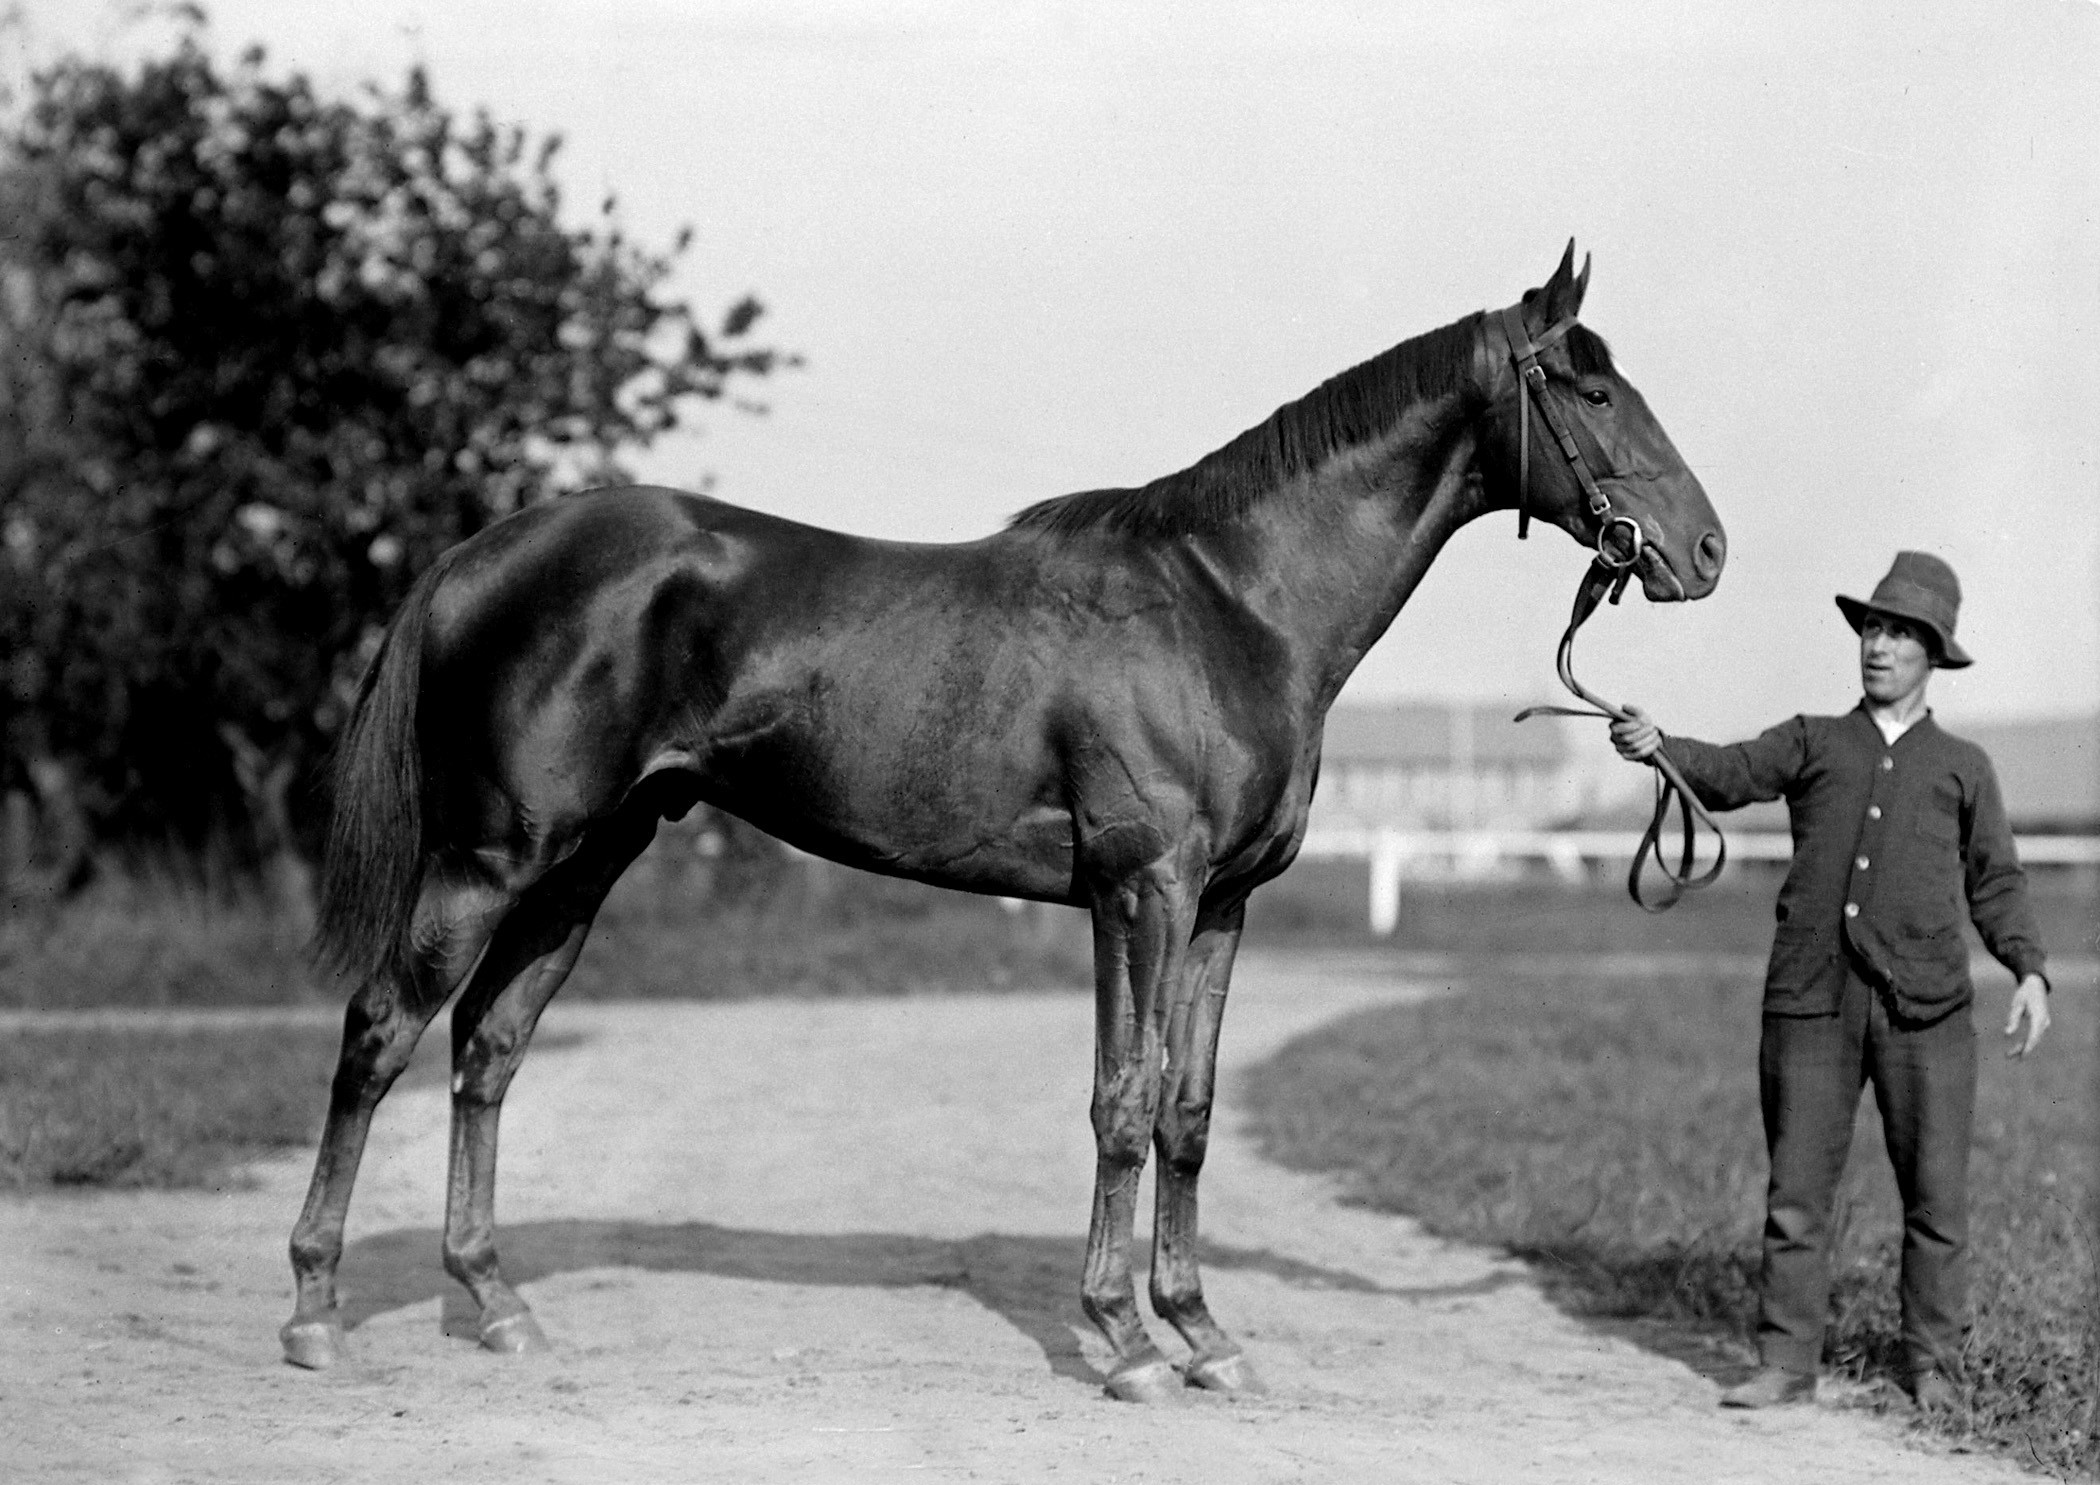 Man o' War (Keeneland Library Cook Collection)